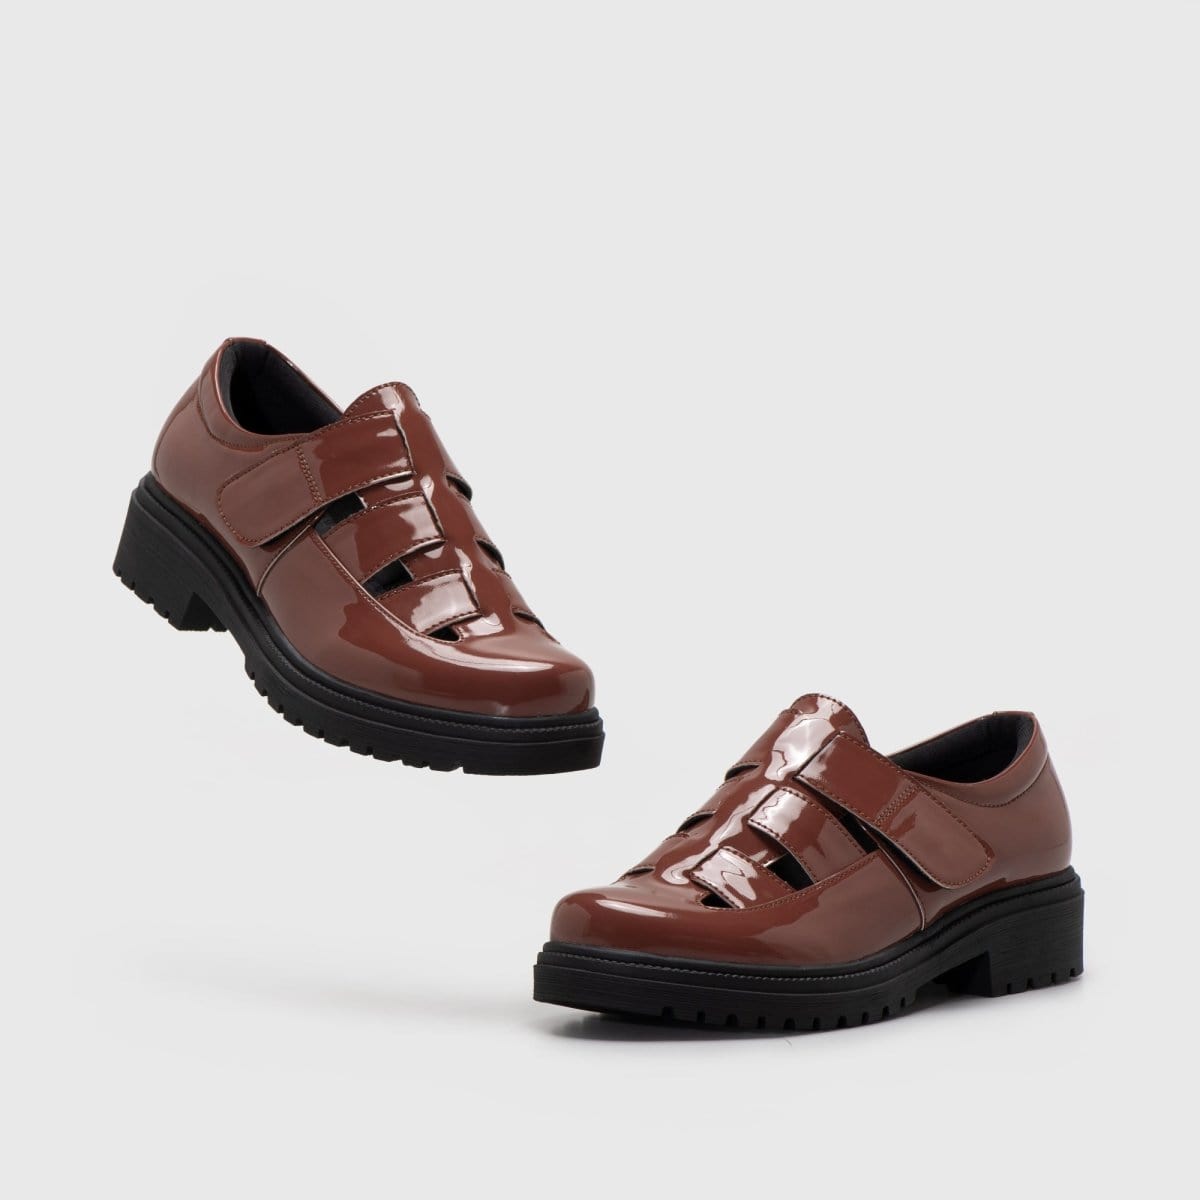 Adorable Projects Official Oxford Dasa Oxford Brown